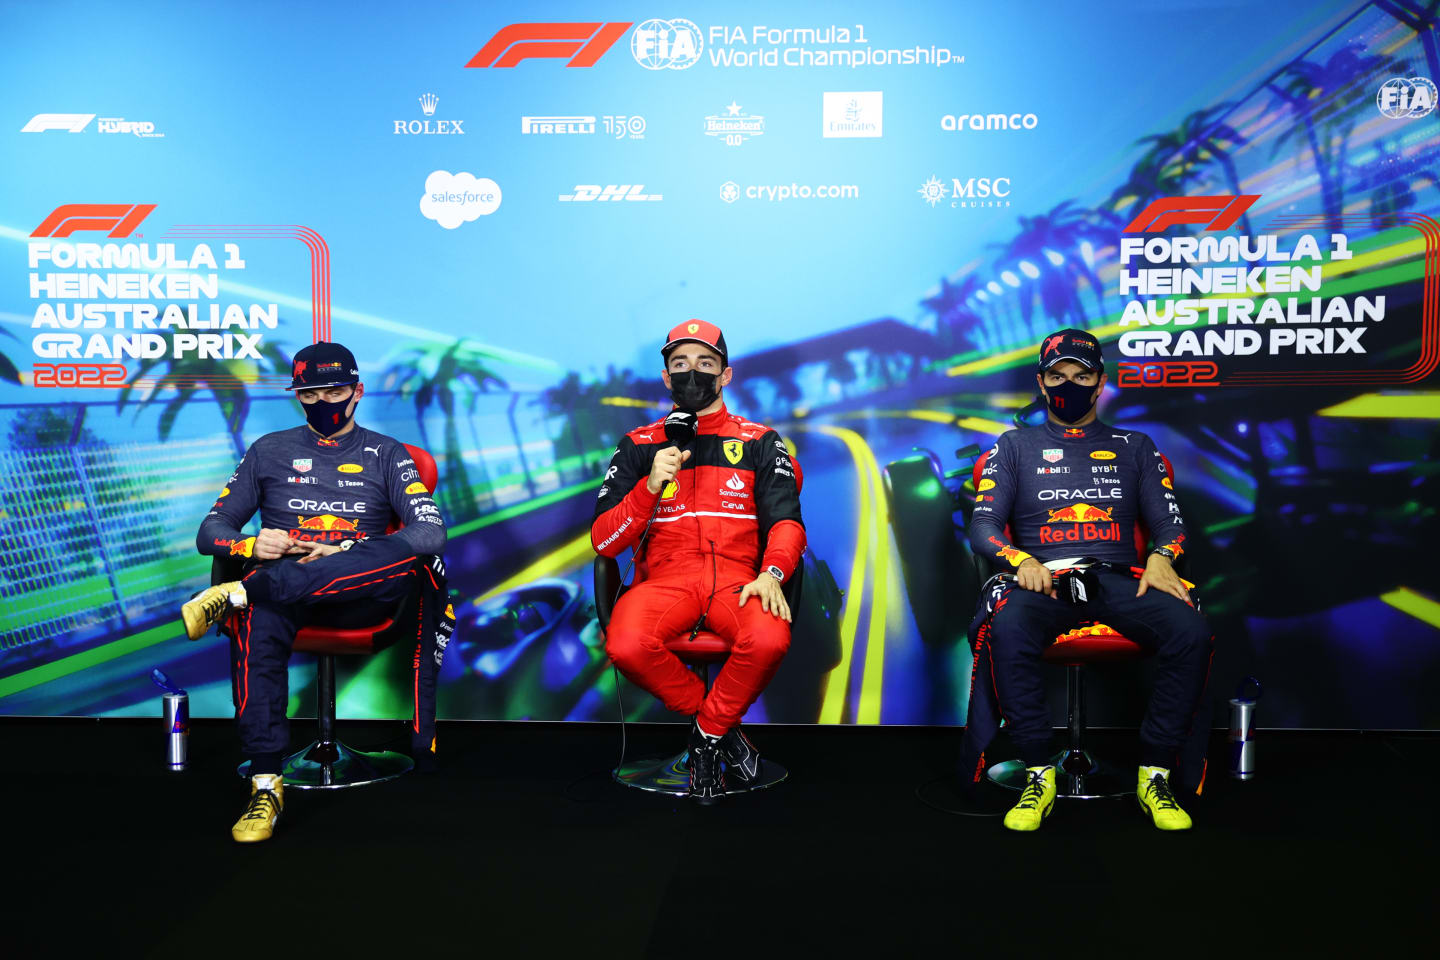 MELBOURNE, AUSTRALIA - APRIL 09: Pole position qualifier Charles Leclerc of Monaco and Ferrari (C), Second placed qualifier Max Verstappen of the Netherlands and Oracle Red Bull Racing (L) and Third placed qualifier Sergio Perez of Mexico and Oracle Red Bull Racing (R) talk in the press conference after qualifying ahead of the F1 Grand Prix of Australia at Melbourne Grand Prix Circuit on April 09, 2022 in Melbourne, Australia. (Photo by Dan Istitene - Formula 1/Formula 1 via Getty Images)